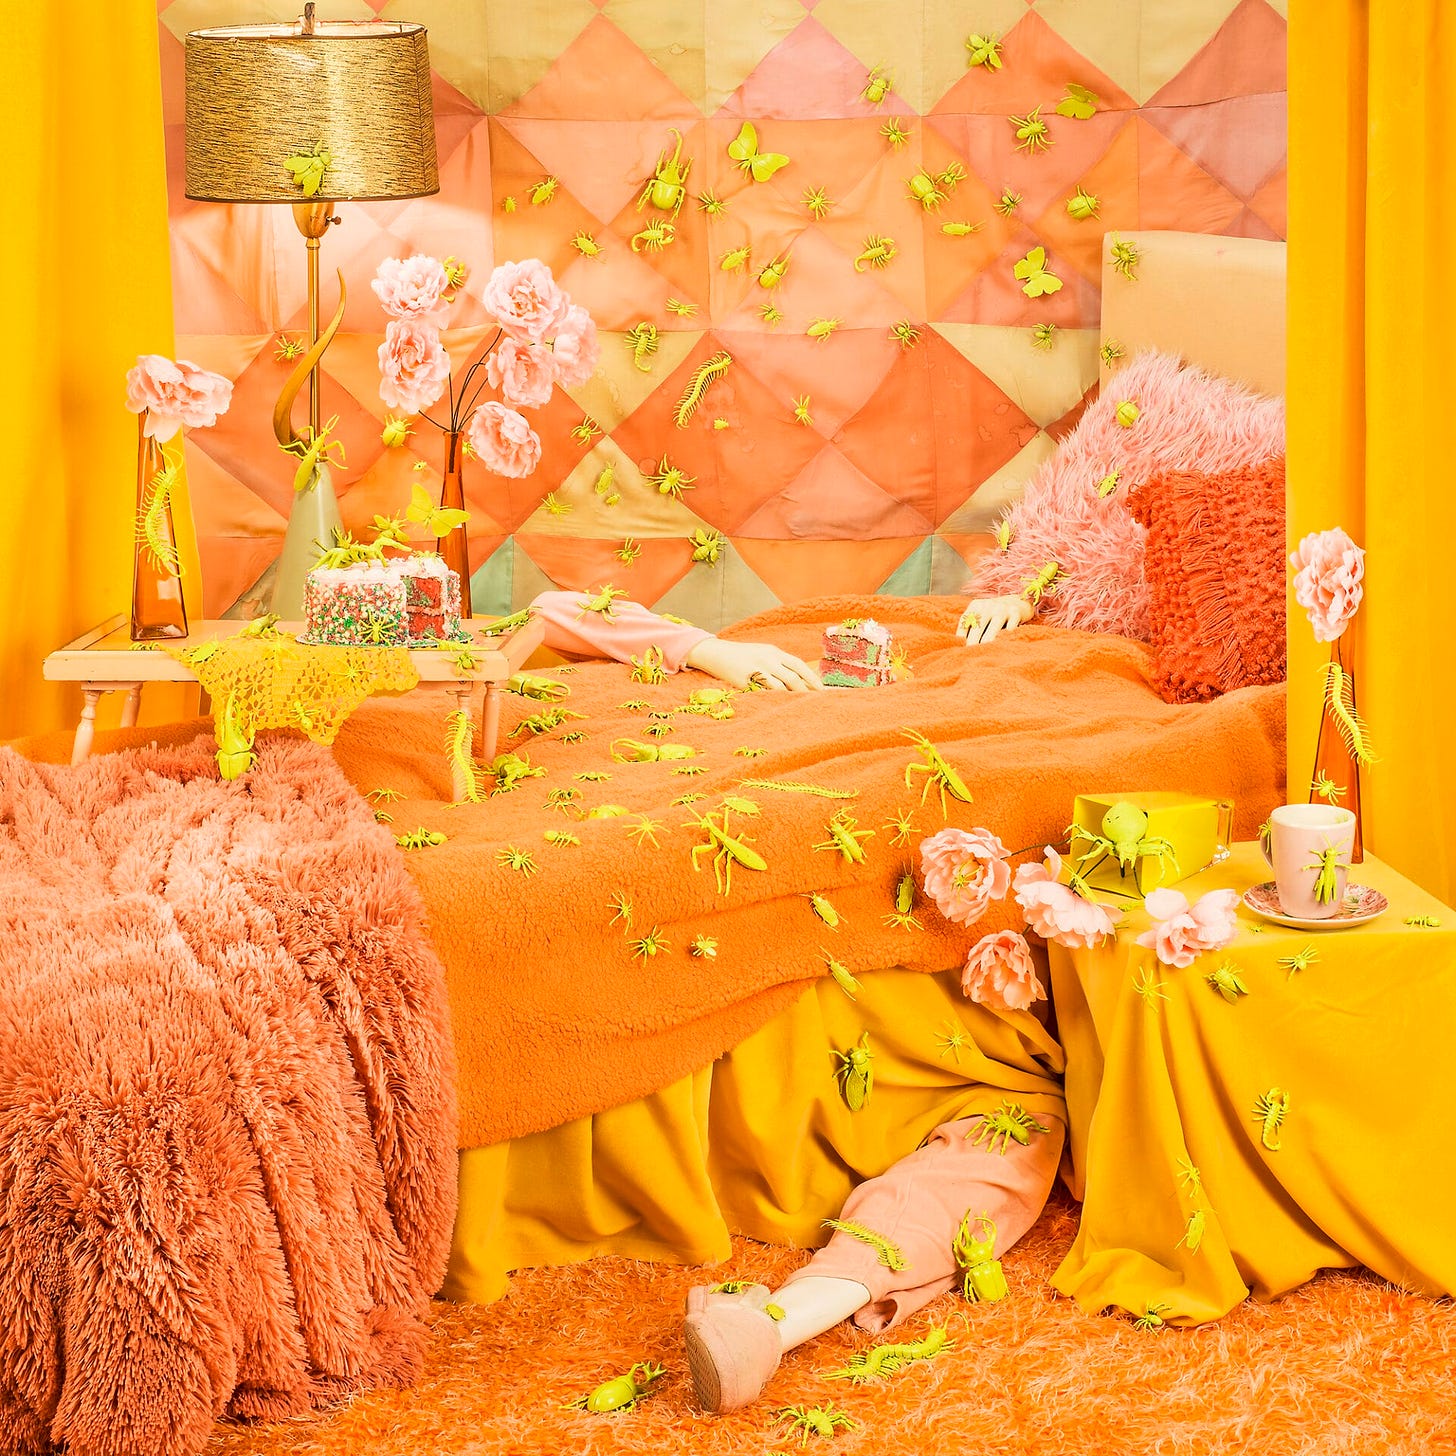 an elaborately staged photograph with an orange theme featuring a posed mannequin disappearing underneath a bed and overwhelmed by a chaotic scene of yellow insects crawling all over the place